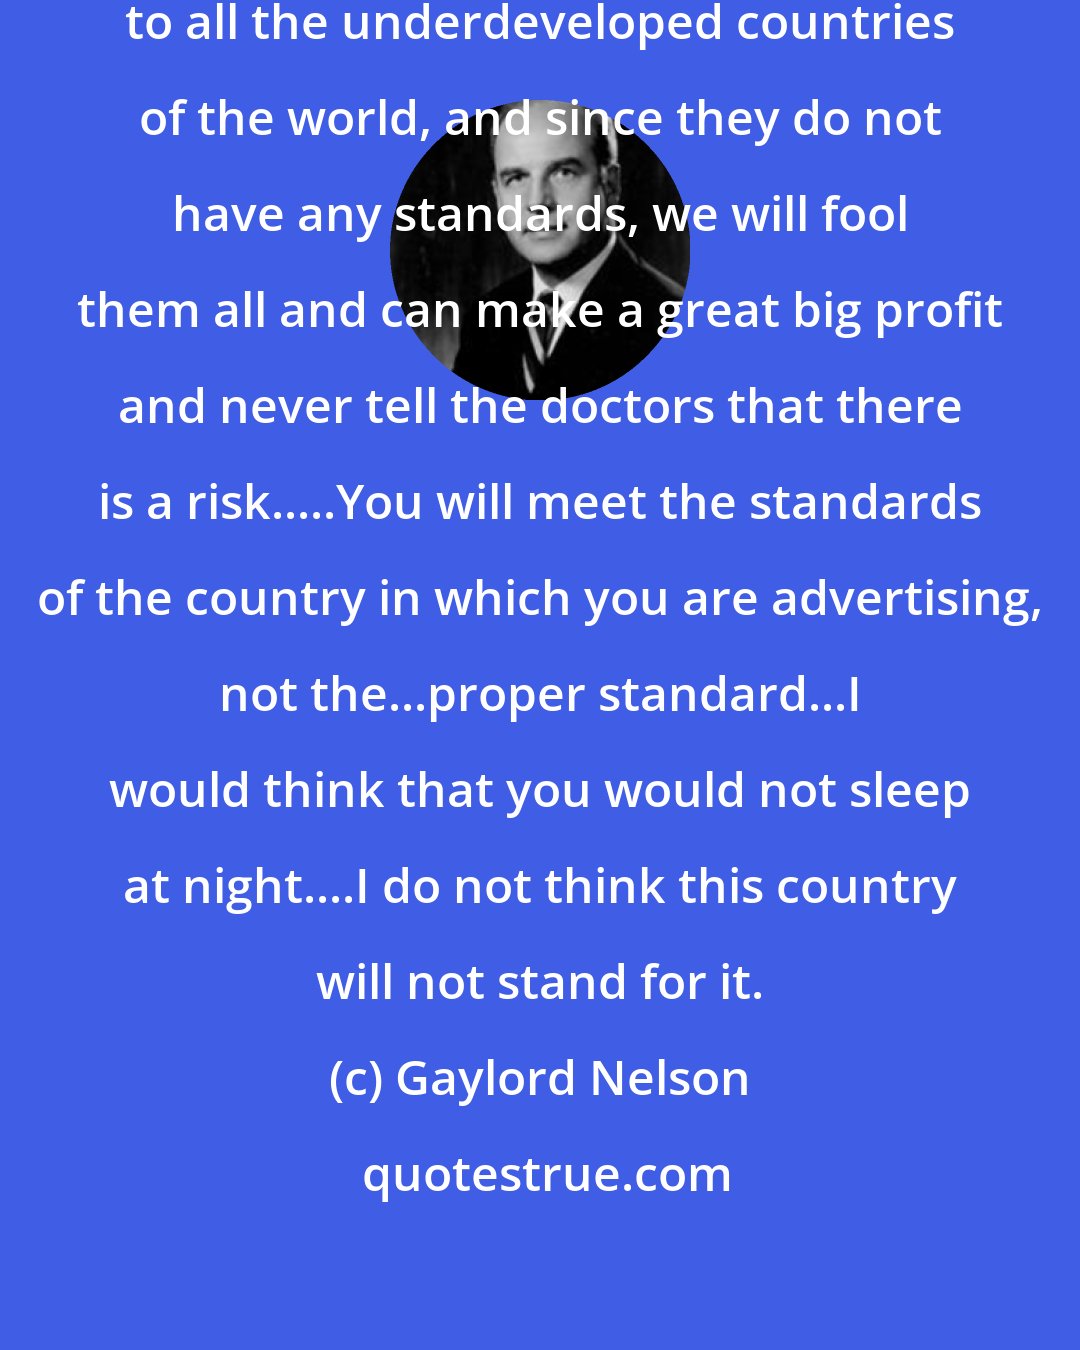 Gaylord Nelson: ...Your company...will send drugs to all the underdeveloped countries of the world, and since they do not have any standards, we will fool them all and can make a great big profit and never tell the doctors that there is a risk.....You will meet the standards of the country in which you are advertising, not the...proper standard...I would think that you would not sleep at night....I do not think this country will not stand for it.